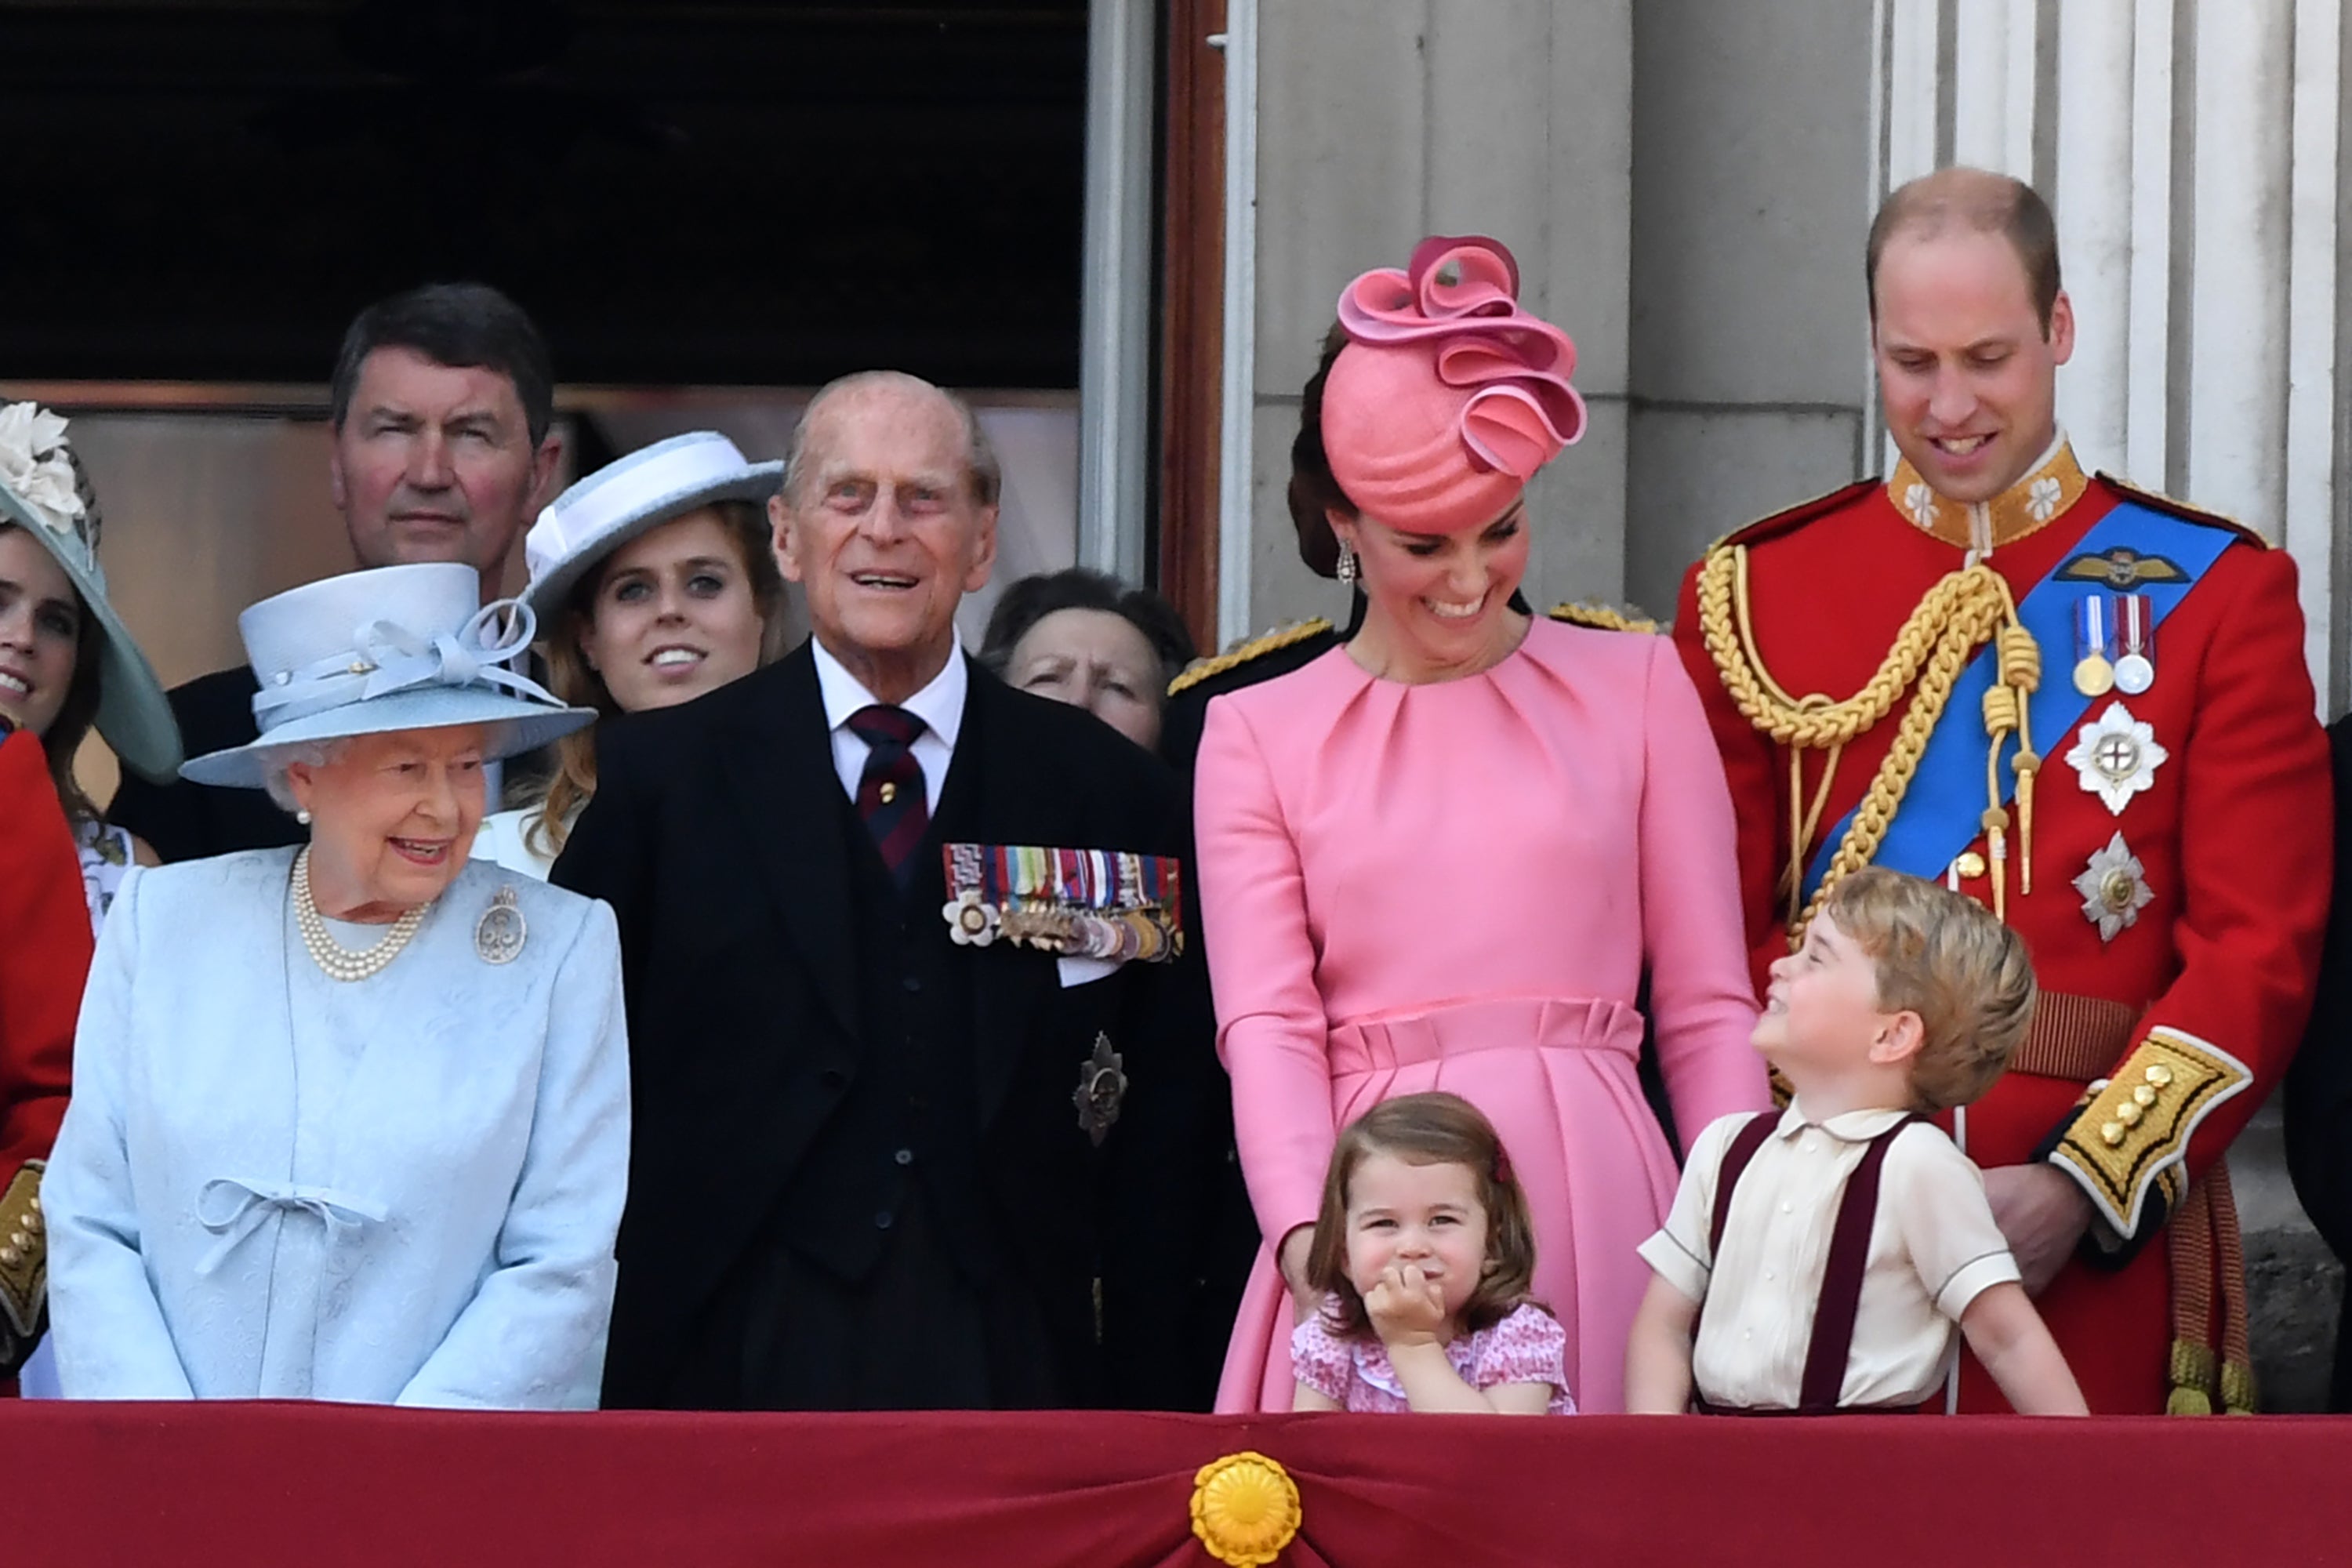 Members of the Royal Family during Trooping of the Colour in 2017